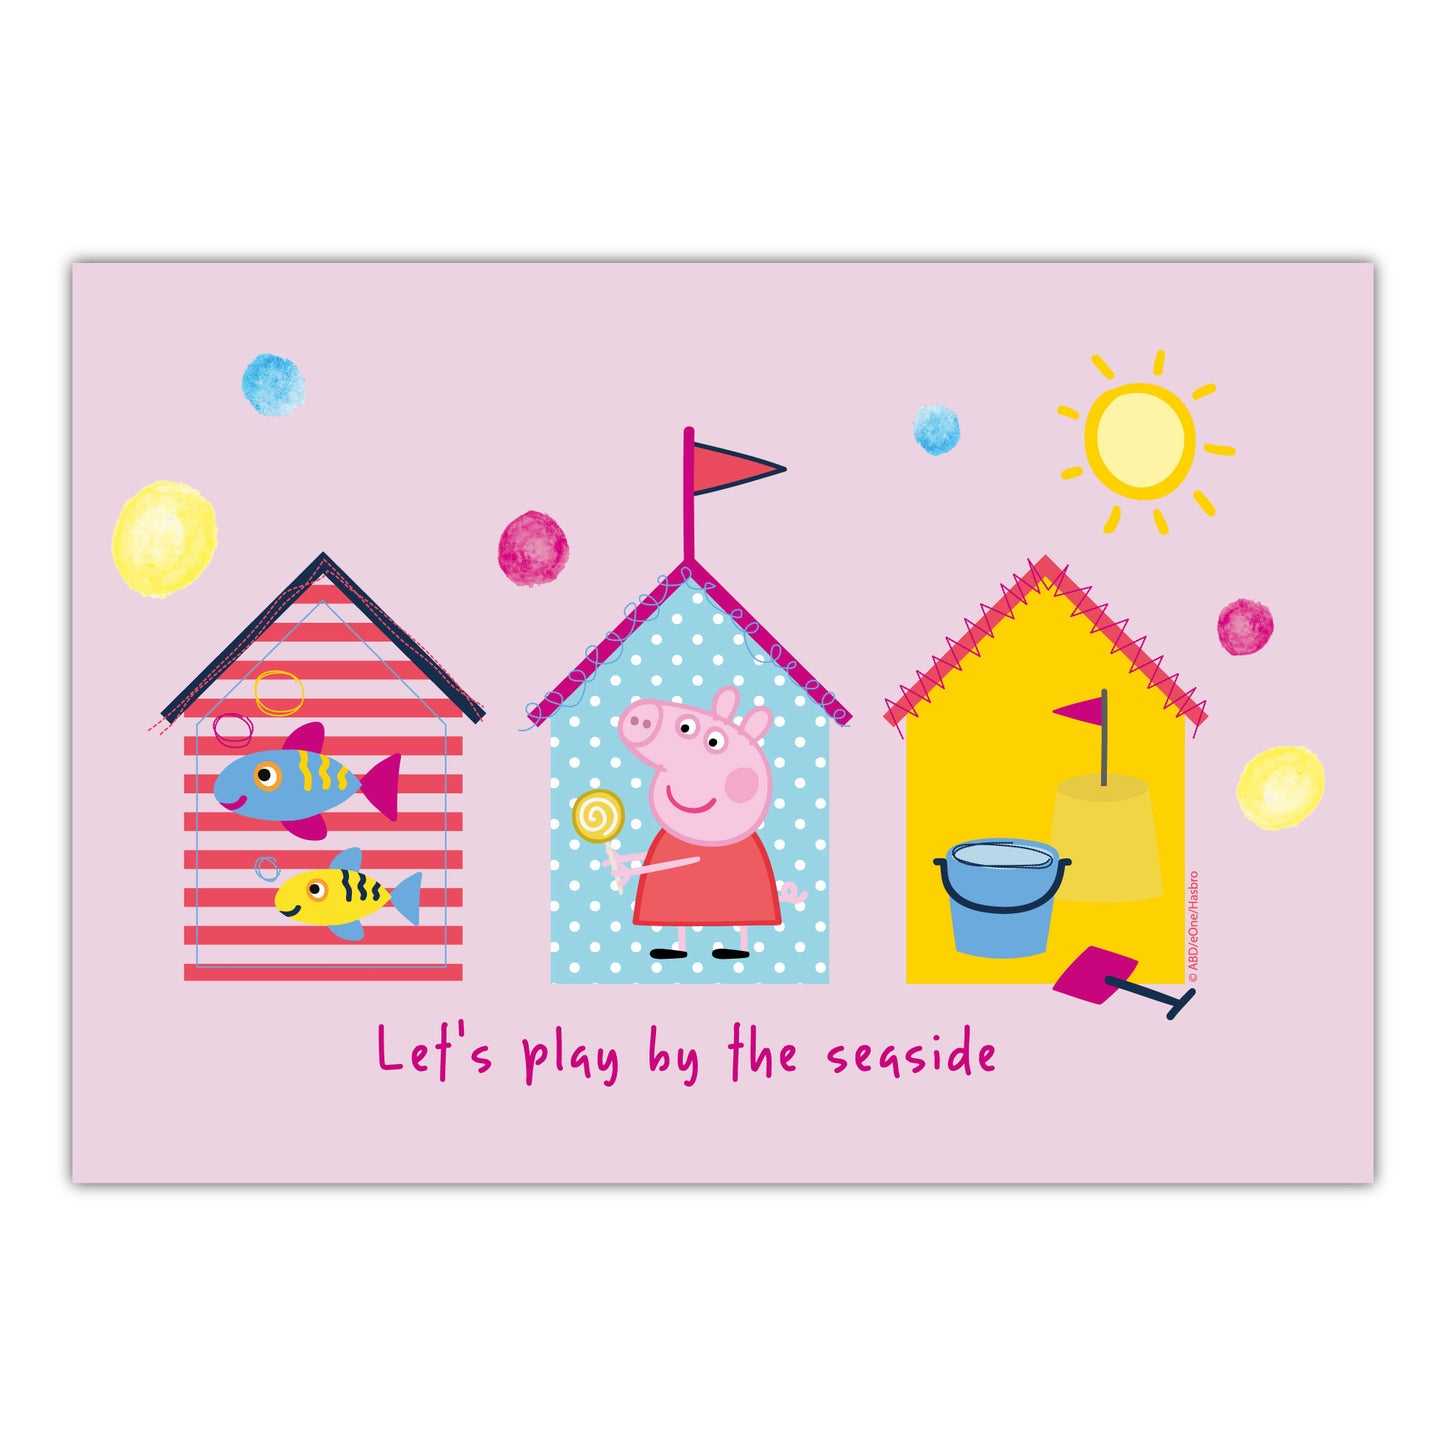 Peppa Pig Print - Peppa Let's Play By The Seaside Poster Wall Art